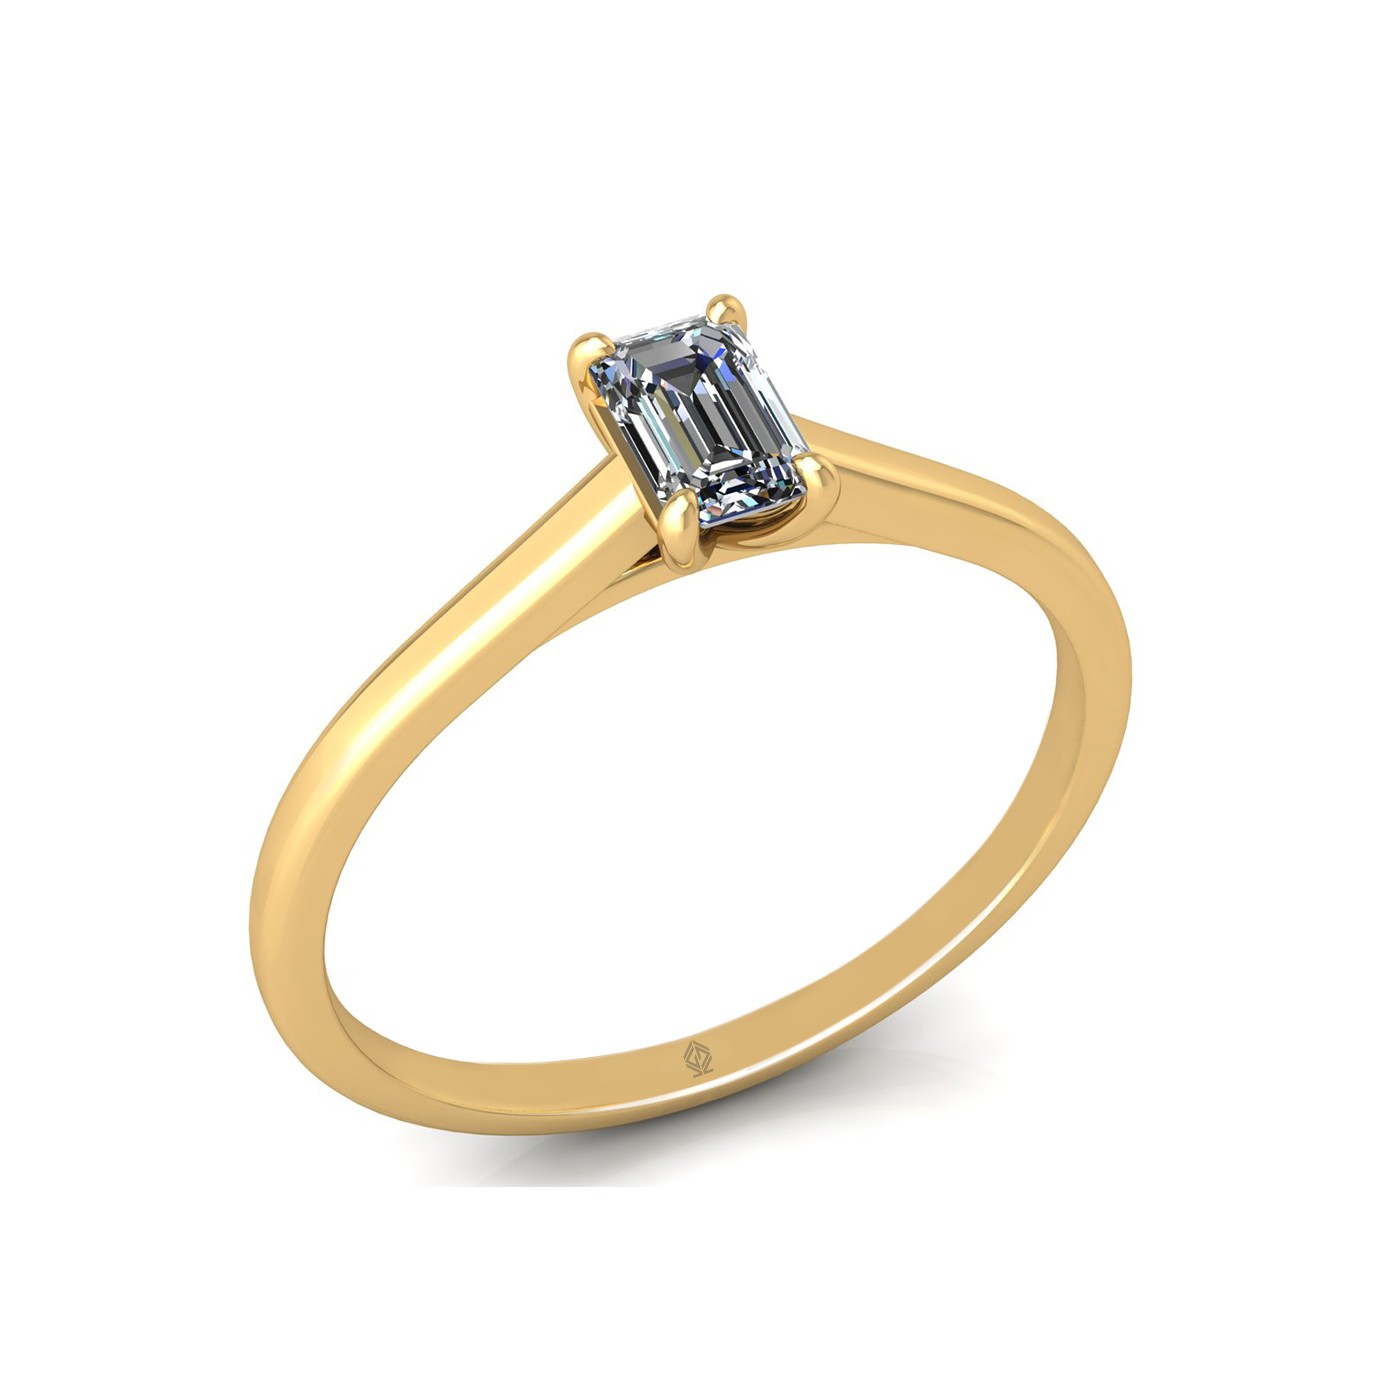 18k yellow gold  0,30 ct 4 prongs solitaire emerald cut diamond engagement ring with whisper thin band